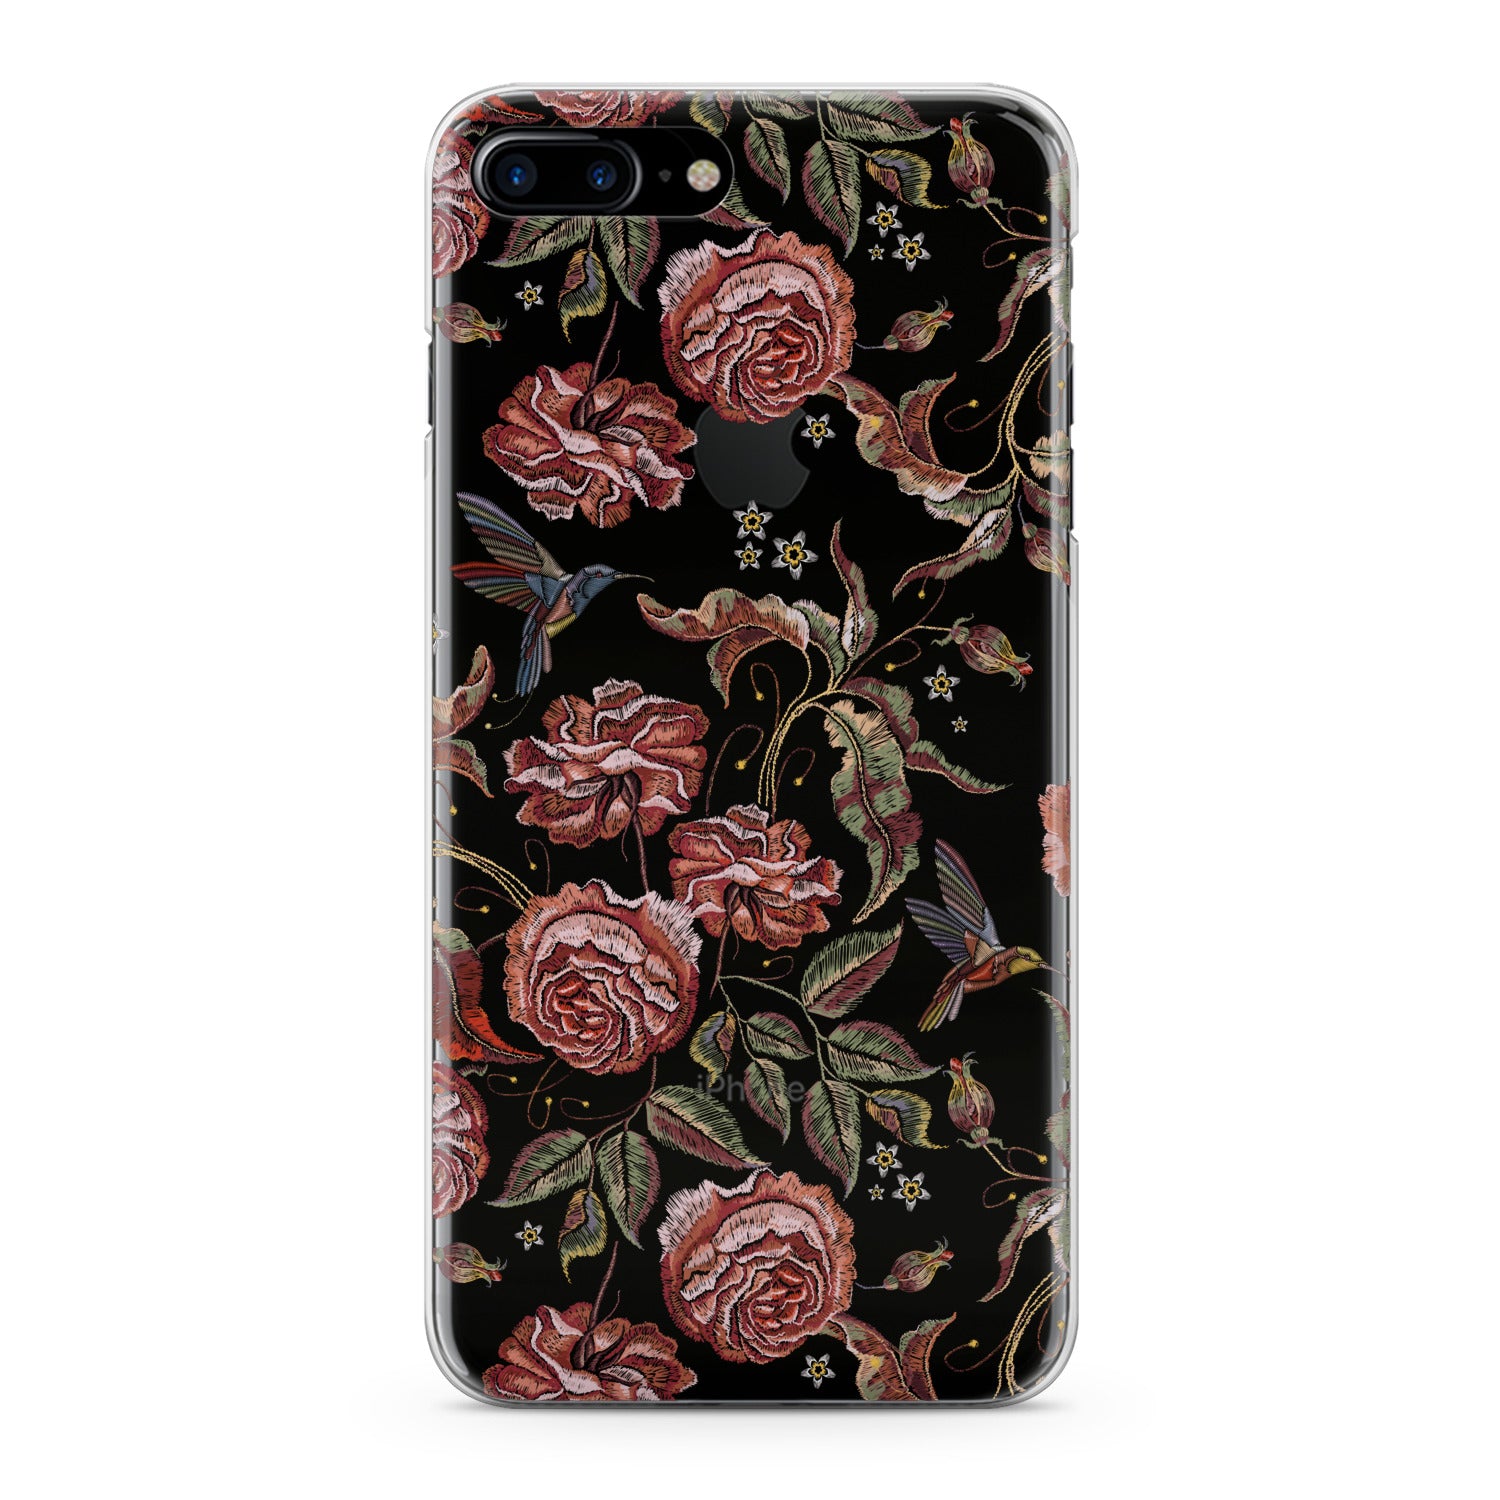 Lex Altern Botanical Roses Phone Case for your iPhone & Android phone.